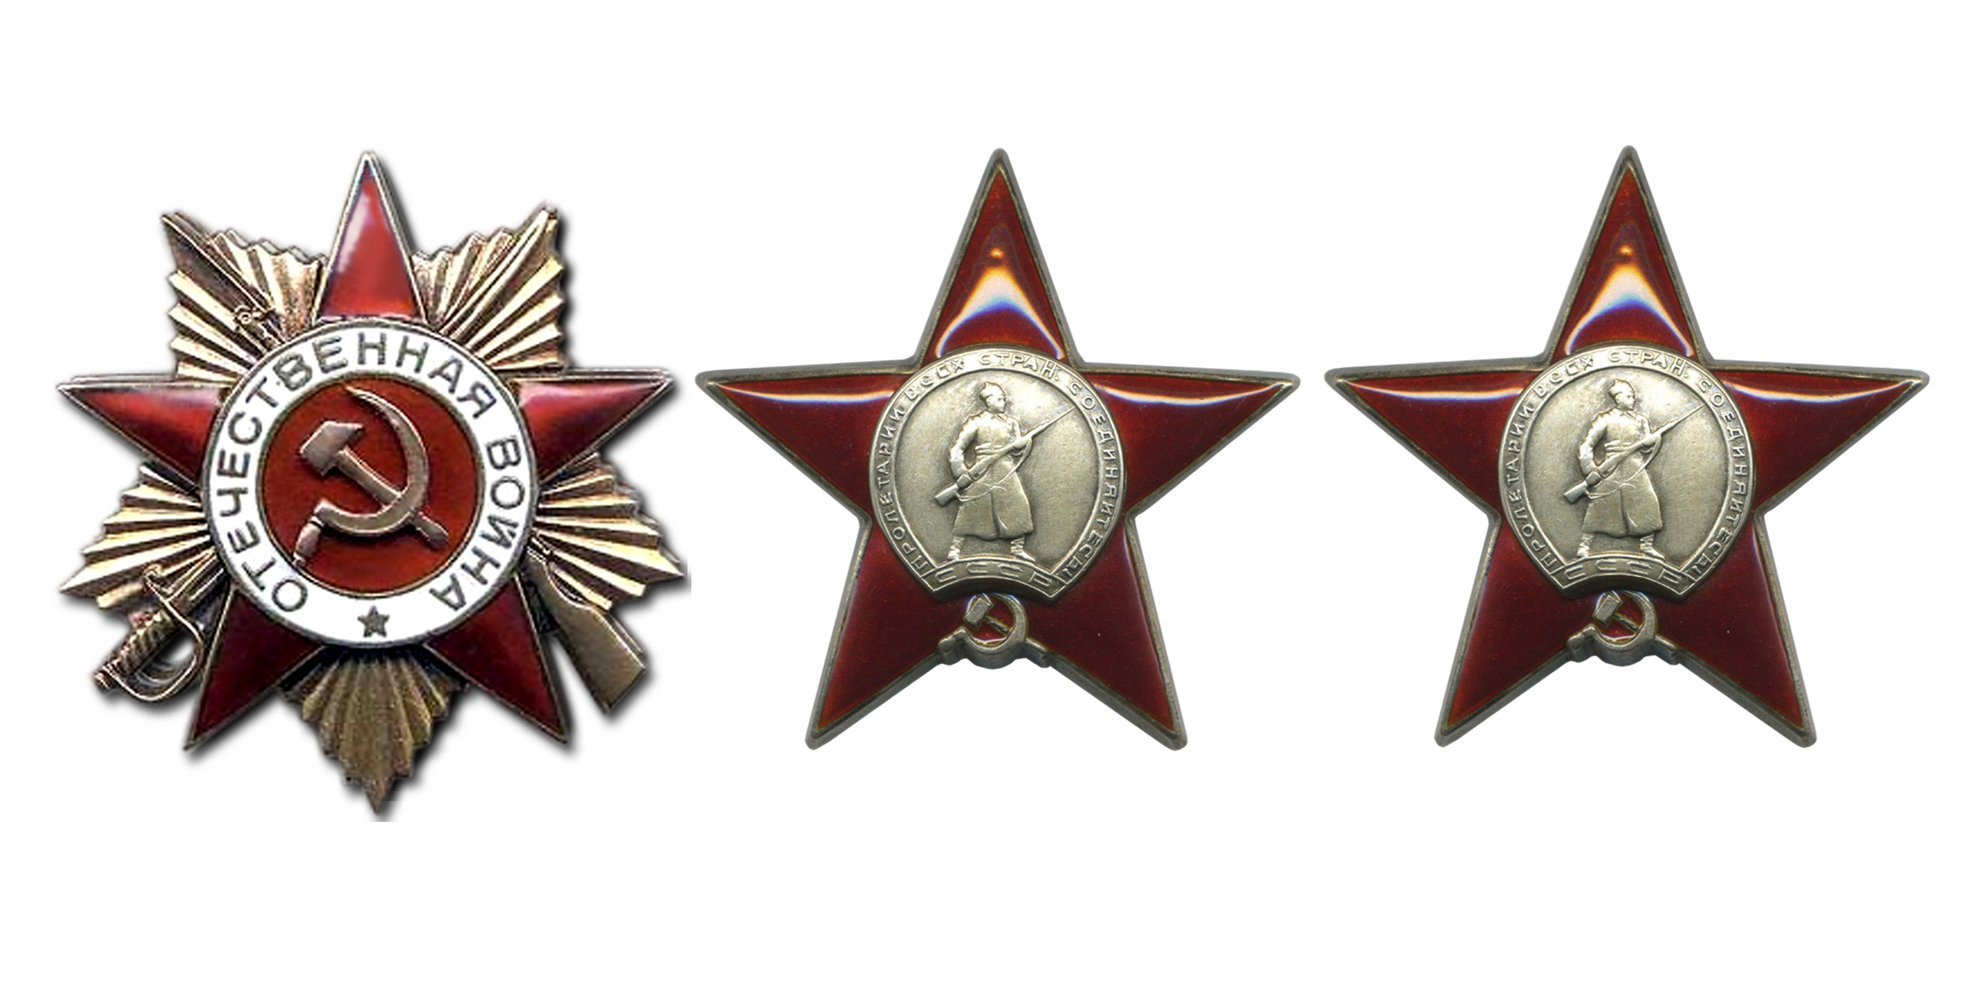 Файл:Orders received by S. S. Lukyanov for breaking the Siege of Leningrad.png